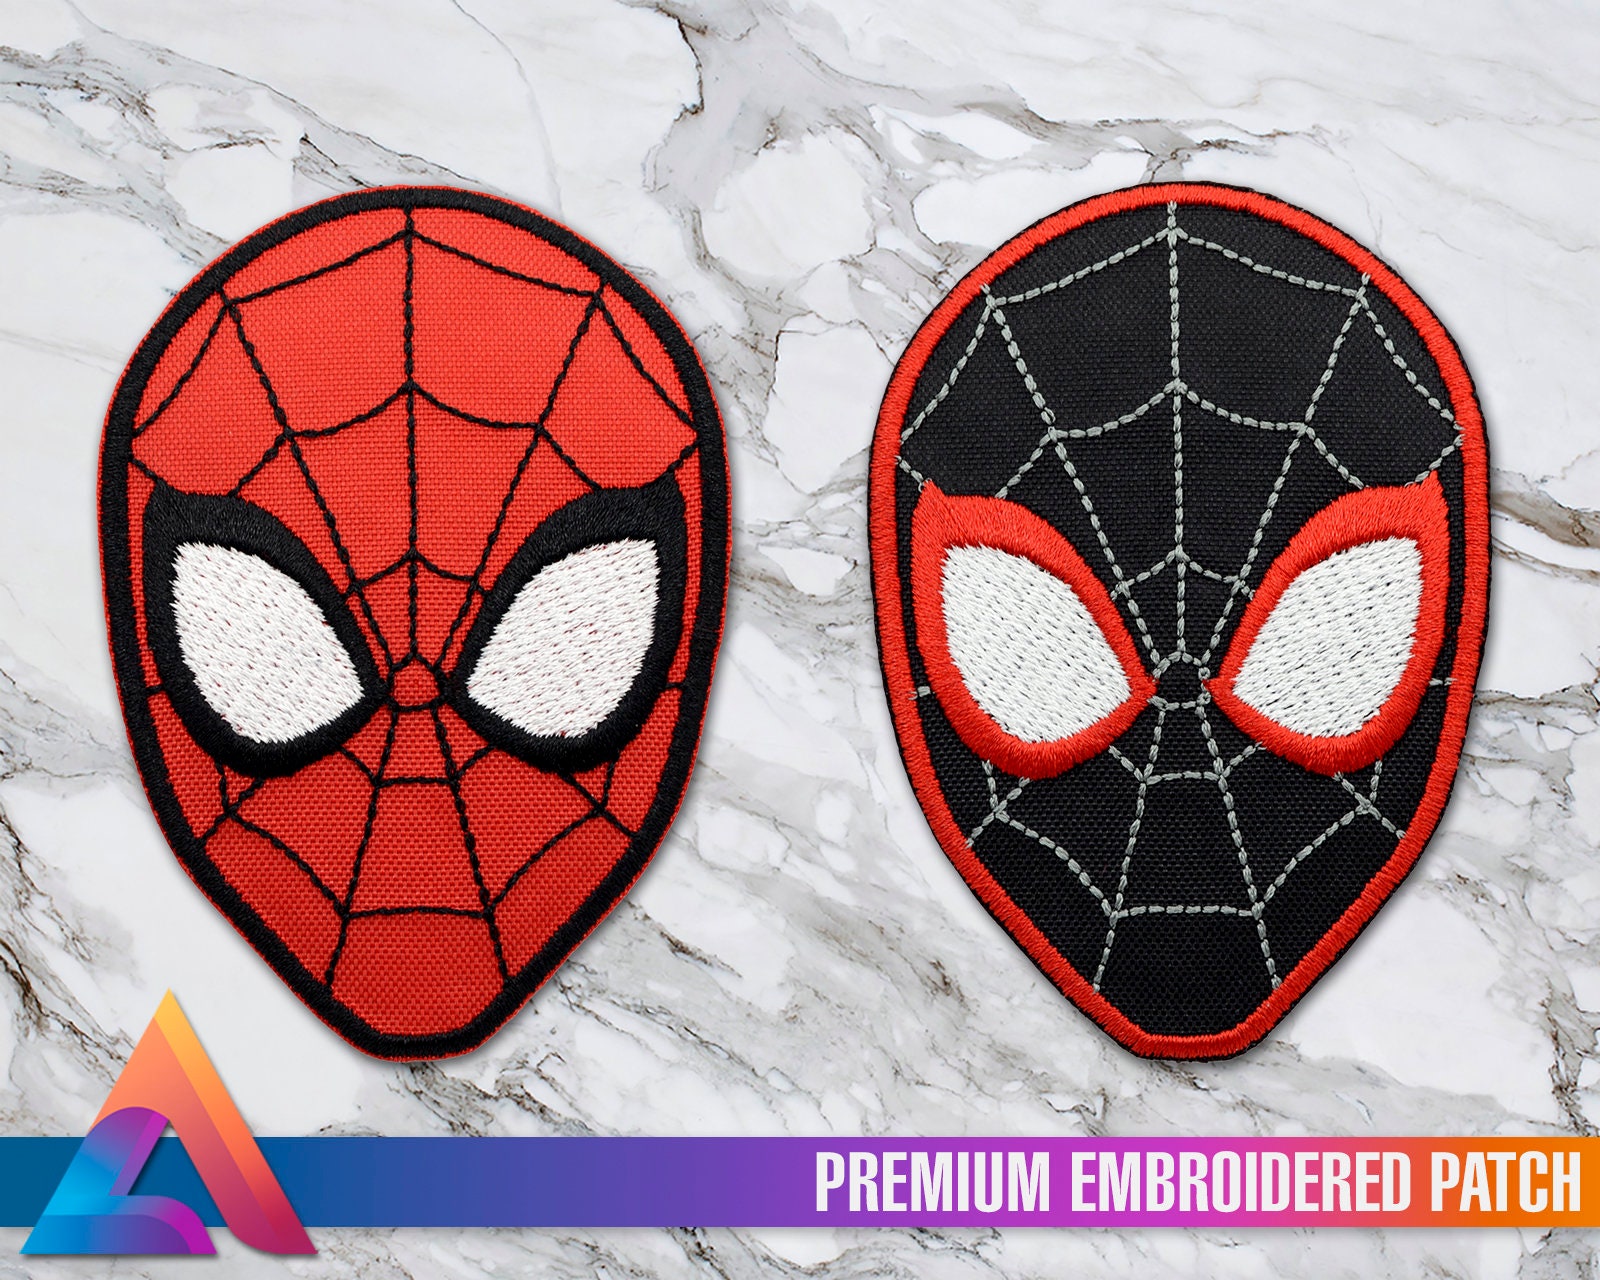 Cute Spiderman Iron on Sew on Patches Badges Spider Man 